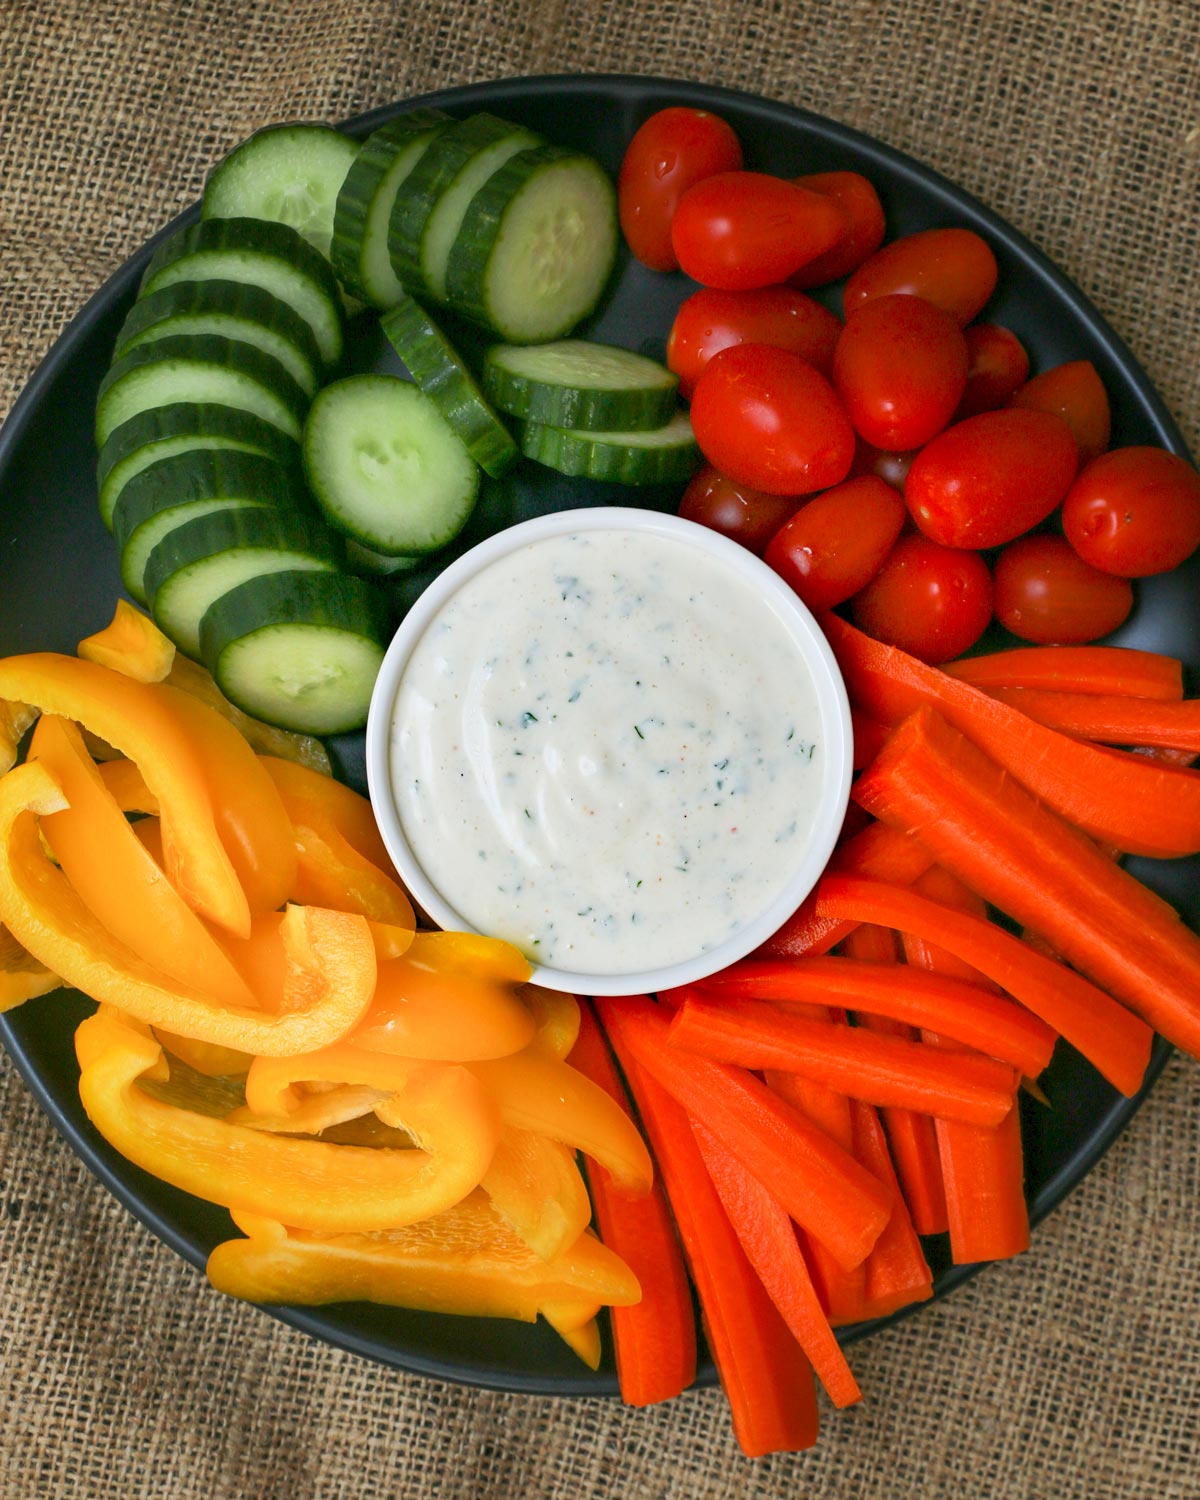 colorful veggie tray with bowl of ranch dip in the center.